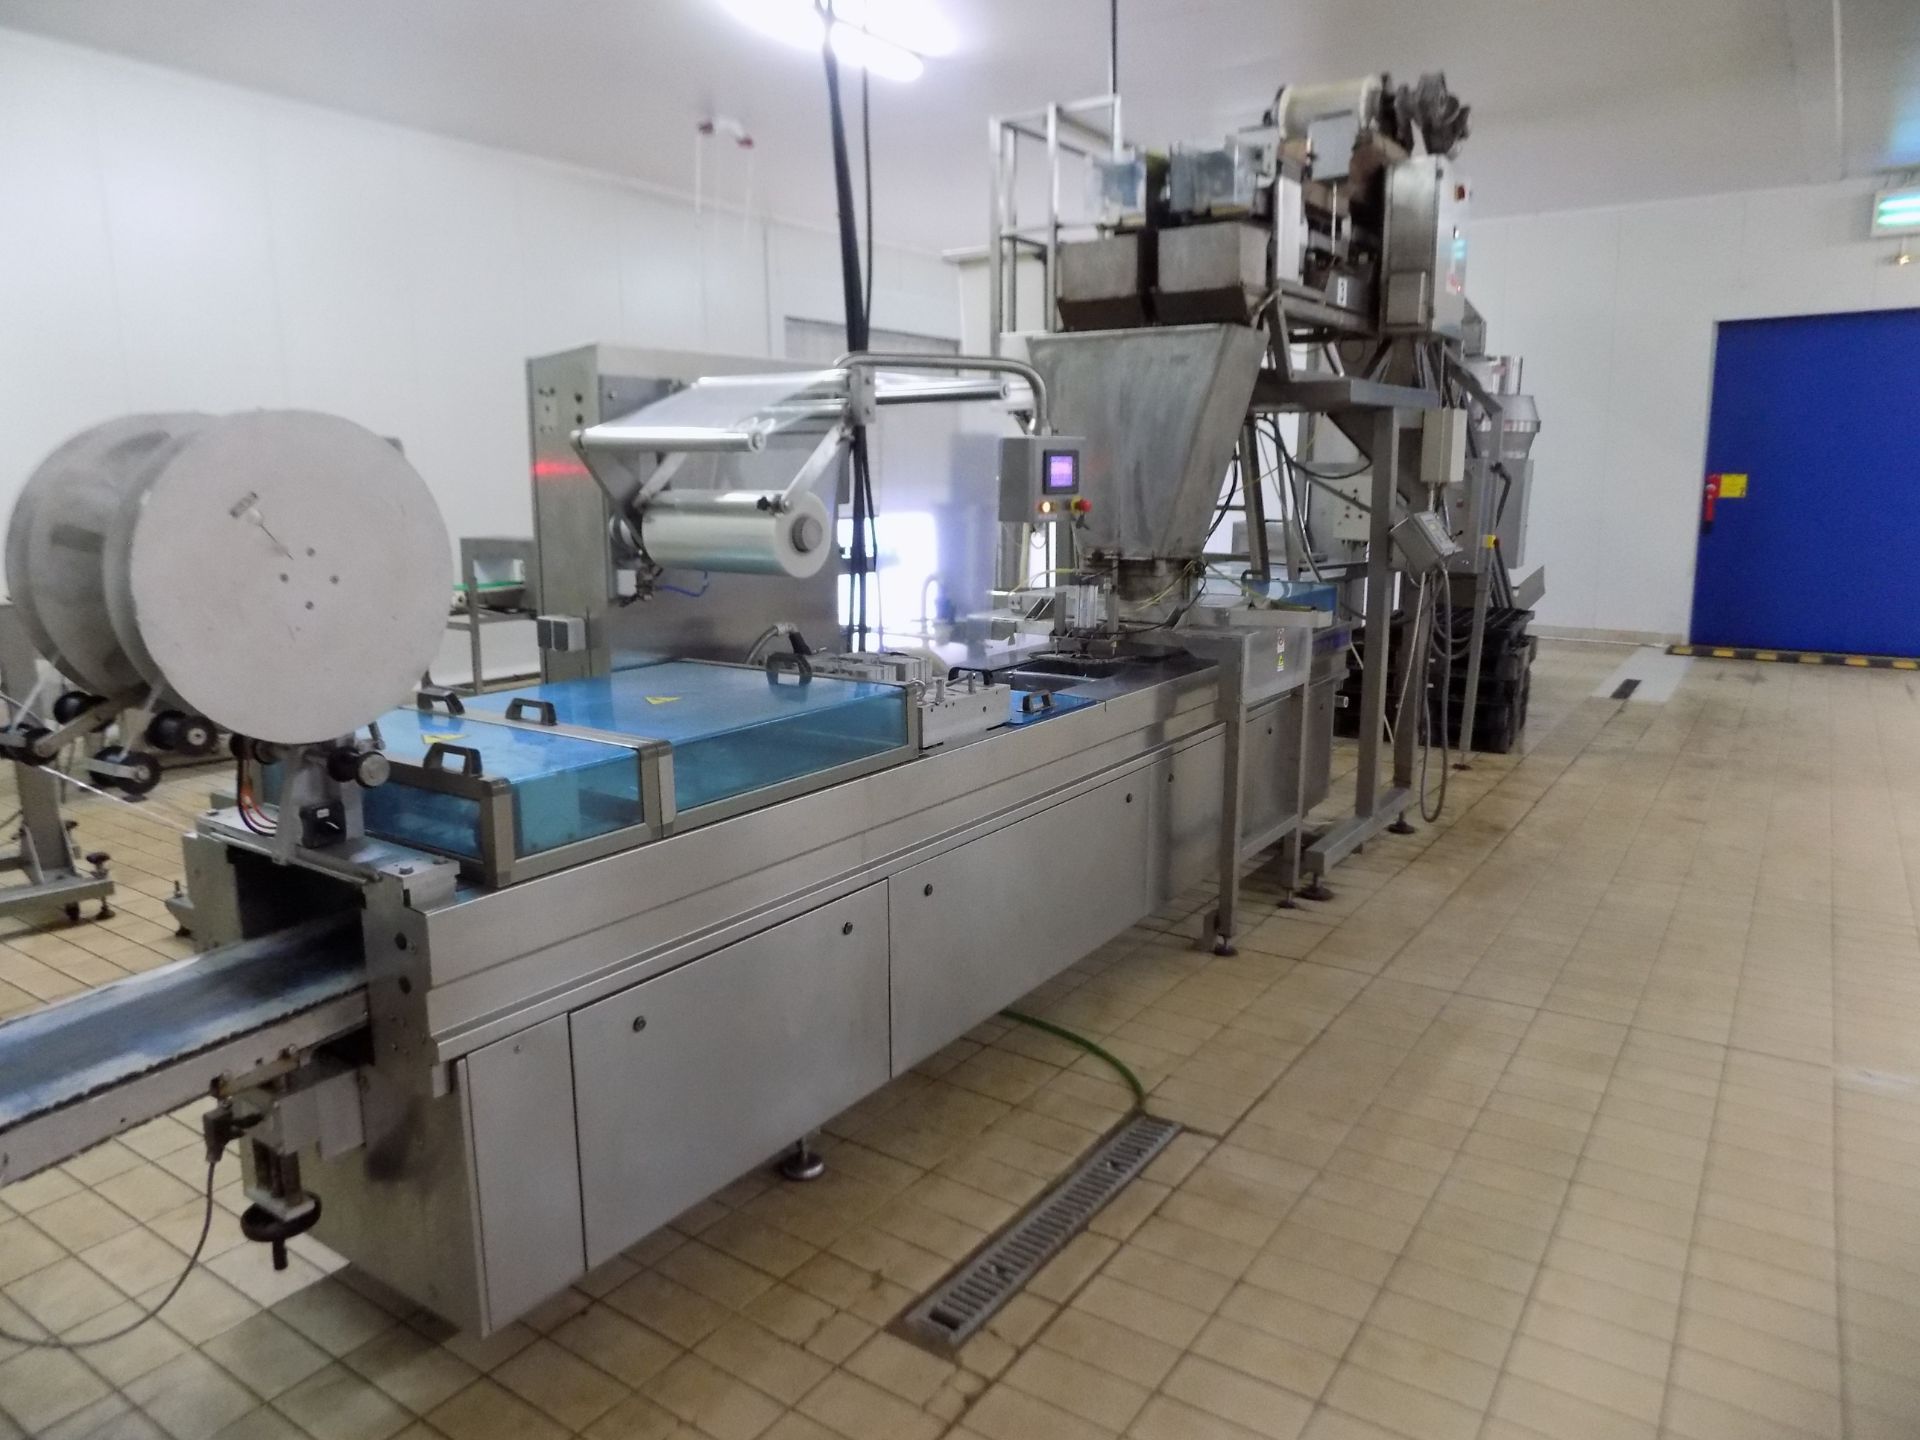 THERMOFORMING + AUTOMATIC FILLING SIMIONATO SN GR0041 MPS TAU 2 - 2010 COMBINATION LOT 2&3